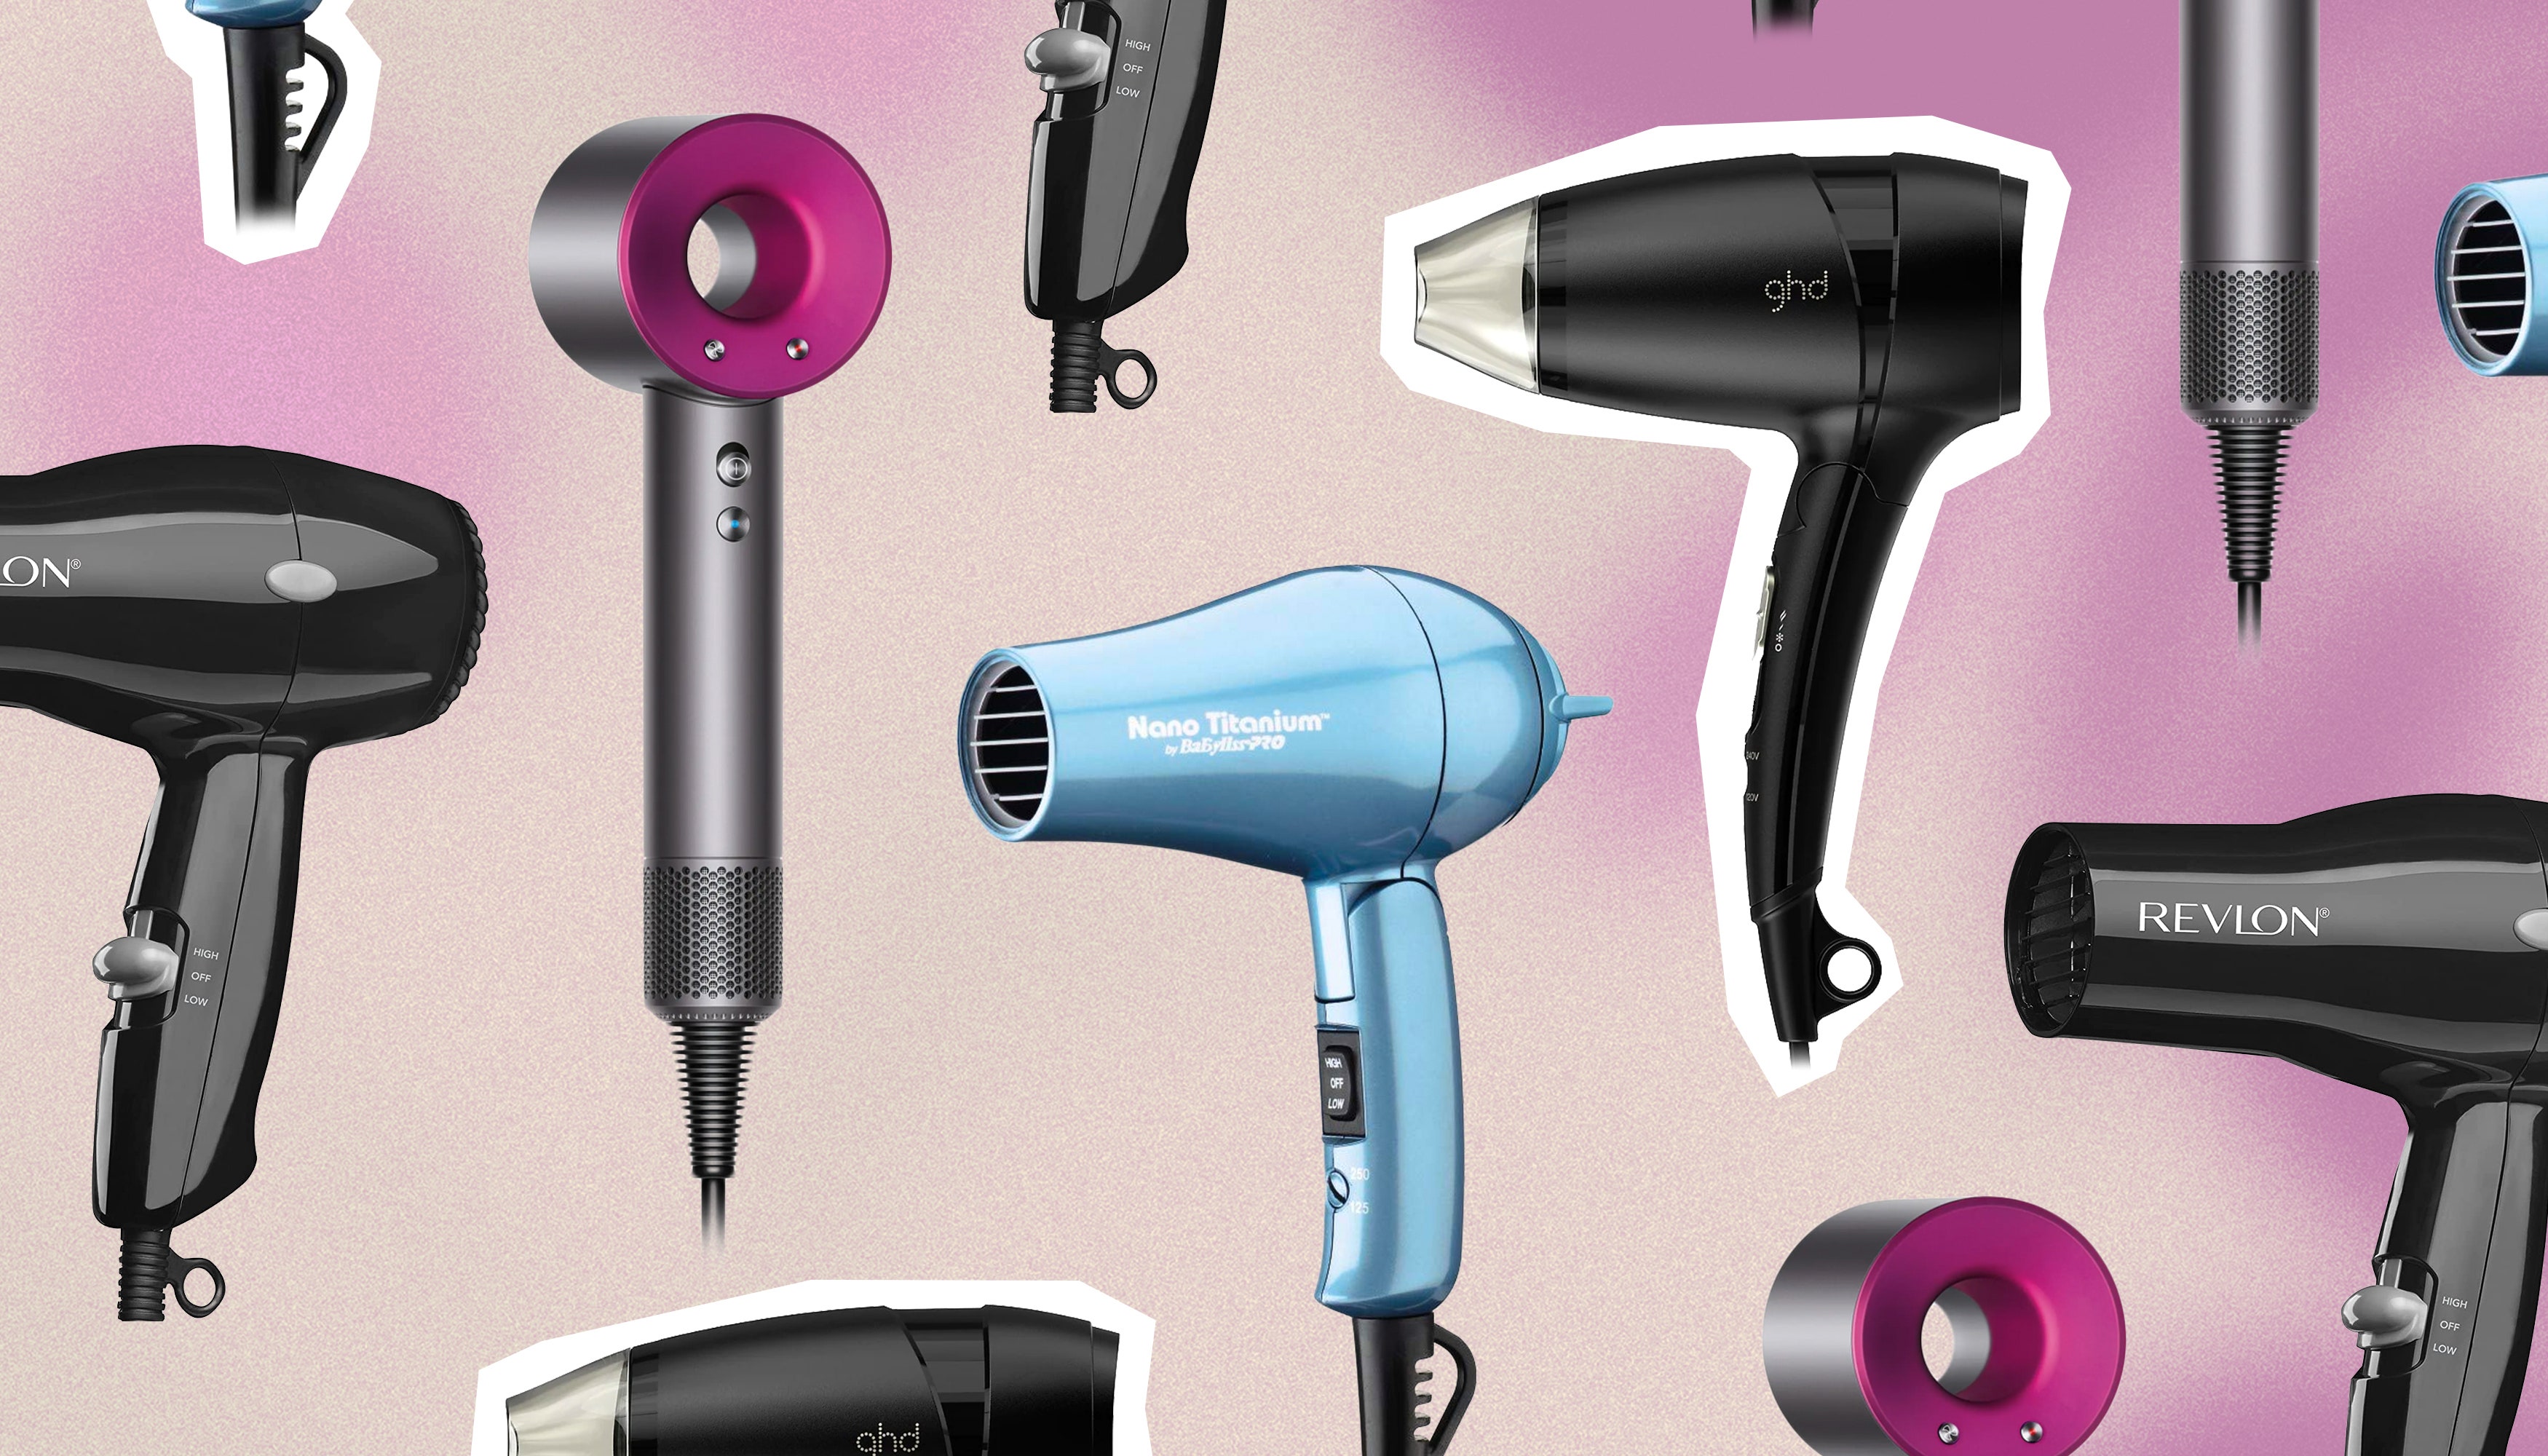 <p>When you’re traveling, you have limited access to the contents of your closet—but downsizing doesn’t mean you have to settle, especially not with the best travel hair dryers. The current generation of portable styling tools delivers the same results as your go-to <a href="https://www.glamour.com/gallery/best-hair-dryers?mbid=synd_msn_rss&utm_source=msn&utm_medium=syndication">full-size hair dryer</a>, but with a slew of packing-friendly bona fides.</p> <h2>Our top picks:</h2> <ul> <li><strong>Best Overall:</strong> <a href="https://cna.st/affiliate-link/meh9fHuiYWLiof9TPHZFSwEiX6AbLCXhk8Y1Hh2zFCss65pS8RkPaqgxKYY3wAYsSHrWhCcm4HFKrYR7GvG5CwRuyN1SSnuvurr5utZ6QeTFvXekeWb8aV4e46iV9Mq7KWseYjWzRHKXEz8BkVMAFfVHxgAwjkBoTYg7RobqC" rel="sponsored">Ghd Flight Travel Hair Dryer</a>, $99</li> <li><strong>Best Budget:</strong> <a href="https://cna.st/affiliate-link/2rQwPprcmtWkDNJBXWKqB4JPepZaTTVFVEav4BvNsvRKy7cTfnrGoGymXGLB2ACvWhpa4Kr6a3SYsChpfvBTTmKgyAGYj5K29mGEWoL3WxQzefobVaSoYCDZ43279yGUX6aioTVrEeZdFuCTErTqf3CqG1tfWSjnhqhpNGFR9H4rCWGFSc21P5Upr4BCid68A" rel="sponsored">InfinitiPro By Conair Travel Hair Dryer</a>, $35</li> <li><strong>Best Lightweight:</strong> <a href="https://cna.st/affiliate-link/RLUH3gniSGMDKRHS37XrQQRckrXEhSS2sCmC9NA32EDTJp19njRsp7yJjSeAKrNe6AsY7Y4XbYAV96AsPqQAH8AaNFUg5A5Z6UoYHdfLSUFXUMT3vyWzSSDBD7hdGTeYtgTRmiyWjREjP7SitbZaemujVt2drXuTFsuk9rdHMfiLKAj21MAxW21ZueHqpmp" rel="sponsored">BaBylissPro Nano Titanium Travel Dryer</a>, $35</li> <li><strong>Best Dual-Voltage:</strong> <a href="https://cna.st/affiliate-link/HR4R9gBZvZ4oaoLTFzDaVrTx3ufggK6GniPq8AXmpMwpyr8GMGYCWuyecspKiYS8ouiRFjsjBuX2iBU38YGhjFNjPJmntpPhixU8tA79ZBBAUYSjzjzzmpMEGyRNMDd19DwrL4BtjpsEEG23od44scfoEw9uR15re1znPVDXxHh7qHbtPYabPiubCmp" rel="sponsored">Drybar Baby Buttercup Travel Size Blow Dryer</a>, $139</li> <li><strong>Best Mini Hair Dryer:</strong> <a href="https://cna.st/affiliate-link/S99RnZiqgDo8MAR9zZ3Znbove3UJQvaRiskXJSnWM5JP9K1o2WjHS2X7pREMYwEoNvnF9gNFUMYc6eJpWdAefukEJLVCbmov3igF1m1EF29Ho39CnAtSGVdksDUTJCX9nZpZ4Hg" rel="sponsored">Lura Mini Portable Travel Hair Dryer</a>, $36</li> <li><strong>Best Blow Dryer Brush:</strong> <a href="https://cna.st/affiliate-link/HR4R9gBZvZ4oaoLTFzDaVrTx3ufggK6GniPq8AXmpMwpyr8GMGYCWuyecspKiYS8msUDGQJqfiz9tvtZy9hkAkEWvsVJAxreeFYH5FACN4aEtxU9QukJzDf1vJARtfXswEctoGYpUihT2dsy2zTHeqNwmkASBhc7mnKLQR3JUwvAGAe2rKFqXdMydL6" rel="sponsored">Revlon One-Step Volumizer PLUS 2.0</a>, $40</li> </ul> <h2>How do I choose a compact travel hair dryer?</h2> <p>Like their standard counterparts, travel blow dryers aren’t all created equal. Size is important, first and foremost, so look for models that are lightweight—i.e. won’t send you straight over that 50-pound checked baggage threshold—and slim enough to tuck into a jam-packed suitcase, <a href="https://www.glamour.com/gallery/best-carry-on-luggage?mbid=synd_msn_rss&utm_source=msn&utm_medium=syndication">carry-on</a>, or <a href="https://www.glamour.com/gallery/best-tote-bags?mbid=synd_msn_rss&utm_source=msn&utm_medium=syndication">sturdy tote bag</a>. There are plenty of travel-friendly options that weigh in at just about 1.5 pounds, and many fold to help conserve even more space.</p> <p>You’ll also want to take a peek at any buzzwords or metrics that indicate speed and efficiency. Set your sights on travel hair dryers that feature ceramic or ionic technology for a fast, frizz-free finish. Some may even come with attachments, like a pint-sized diffuser for curly hair to help you nail your style.</p> <p>And, perhaps most importantly, focus on dual-voltage models, since these can safely be used for international travel. Without this functionality, you risk ruining your dryer the second you plug it in and power it on—yep, even with the right outlet adapter. (The same goes for your <a href="https://www.glamour.com/gallery/best-hair-straighteners-flat-irons?mbid=synd_msn_rss&utm_source=msn&utm_medium=syndication">flat iron or straightener</a>, <a href="https://www.glamour.com/gallery/best-hair-dryer-brushes?mbid=synd_msn_rss&utm_source=msn&utm_medium=syndication">blow-dry brush</a>, or <a href="https://www.glamour.com/gallery/best-curling-irons-wands?mbid=synd_msn_rss&utm_source=msn&utm_medium=syndication">curling iron</a>.)</p> <h2>Which hair dryer works in Europe?</h2> <p>This is exactly where that little thing called dual-voltage comes into play. The box or product listing should explicitly state either “dual-voltage” or “120/240V,” the latter of which indicates it works with outlets up to 240 volts. Since American outlets operate on 120 volts and European outlets operate on 220 volts, this is key.</p> <p>So as you think of which <a href="https://www.glamour.com/story/best-summer-dresses?mbid=synd_msn_rss&utm_source=msn&utm_medium=syndication">comfy dresses</a> and <a href="https://www.glamour.com/gallery/best-summer-sneakers?mbid=synd_msn_rss&utm_source=msn&utm_medium=syndication">sneakers</a> to throw into your <a href="https://www.glamour.com/gallery/best-weekender-bags?mbid=synd_msn_rss&utm_source=msn&utm_medium=syndication">weekender bag</a> or carry-on, consider bringing along one of the best travel hair dryers (and <a href="https://www.glamour.com/gallery/travel-size-beauty-products?mbid=synd_msn_rss&utm_source=msn&utm_medium=syndication">TSA-friendly minis</a> of your favorite hair products!), as well. We scoured top retailers, tested a bunch of compact designs out ourselves, and turned to hairstylists for recommendations to deliver you a list of the best travel hair dryers that are actually worth it.</p><p>Sign up for today’s biggest stories, from pop culture to politics.</p><a href="https://www.glamour.com/newsletter/news?sourceCode=msnsend">Sign Up</a>